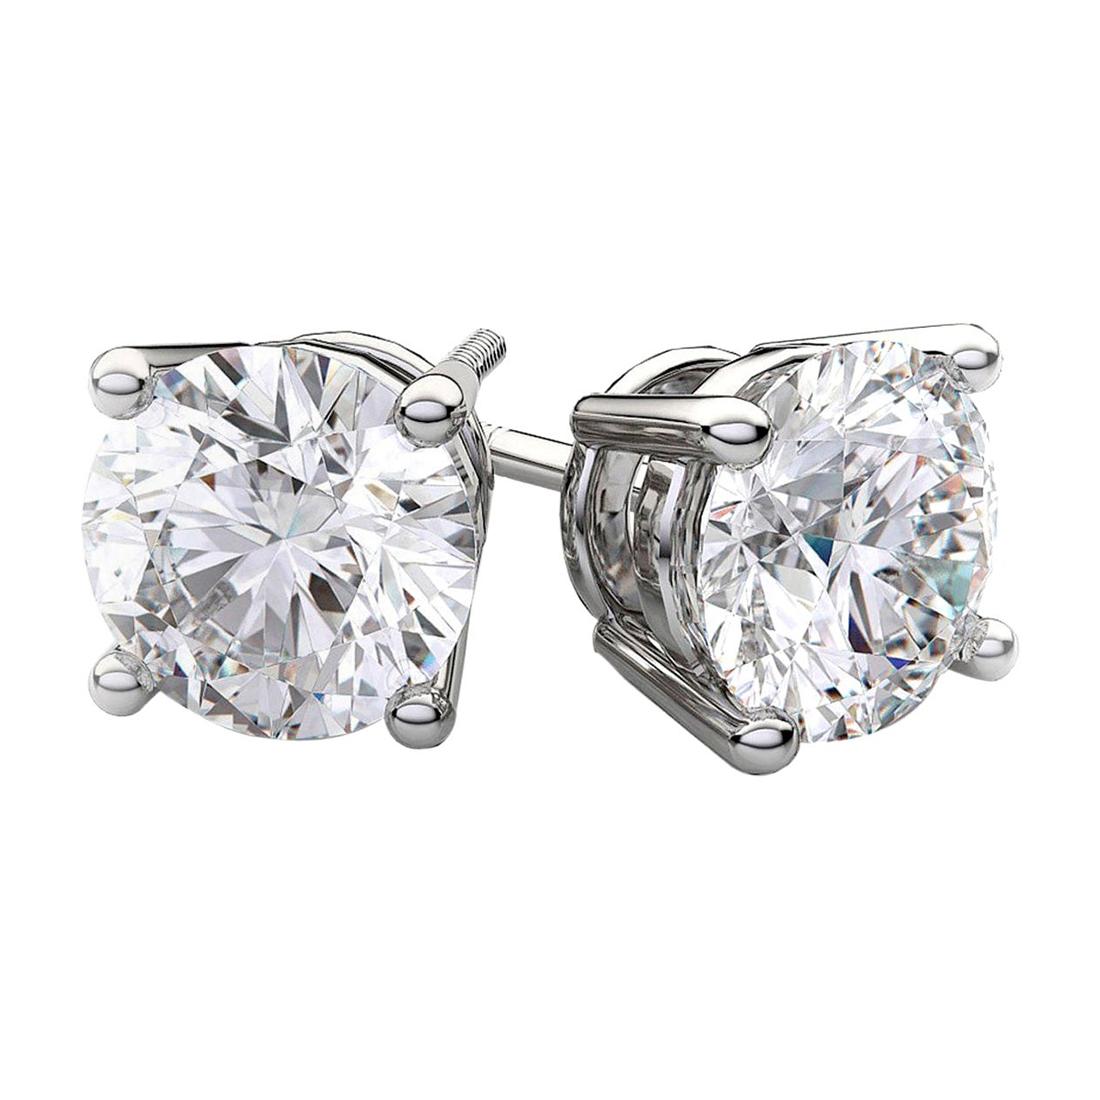 Beauvince GIA HVS2 Certified 2.01 Carat Round Solitaire Diamond Studs